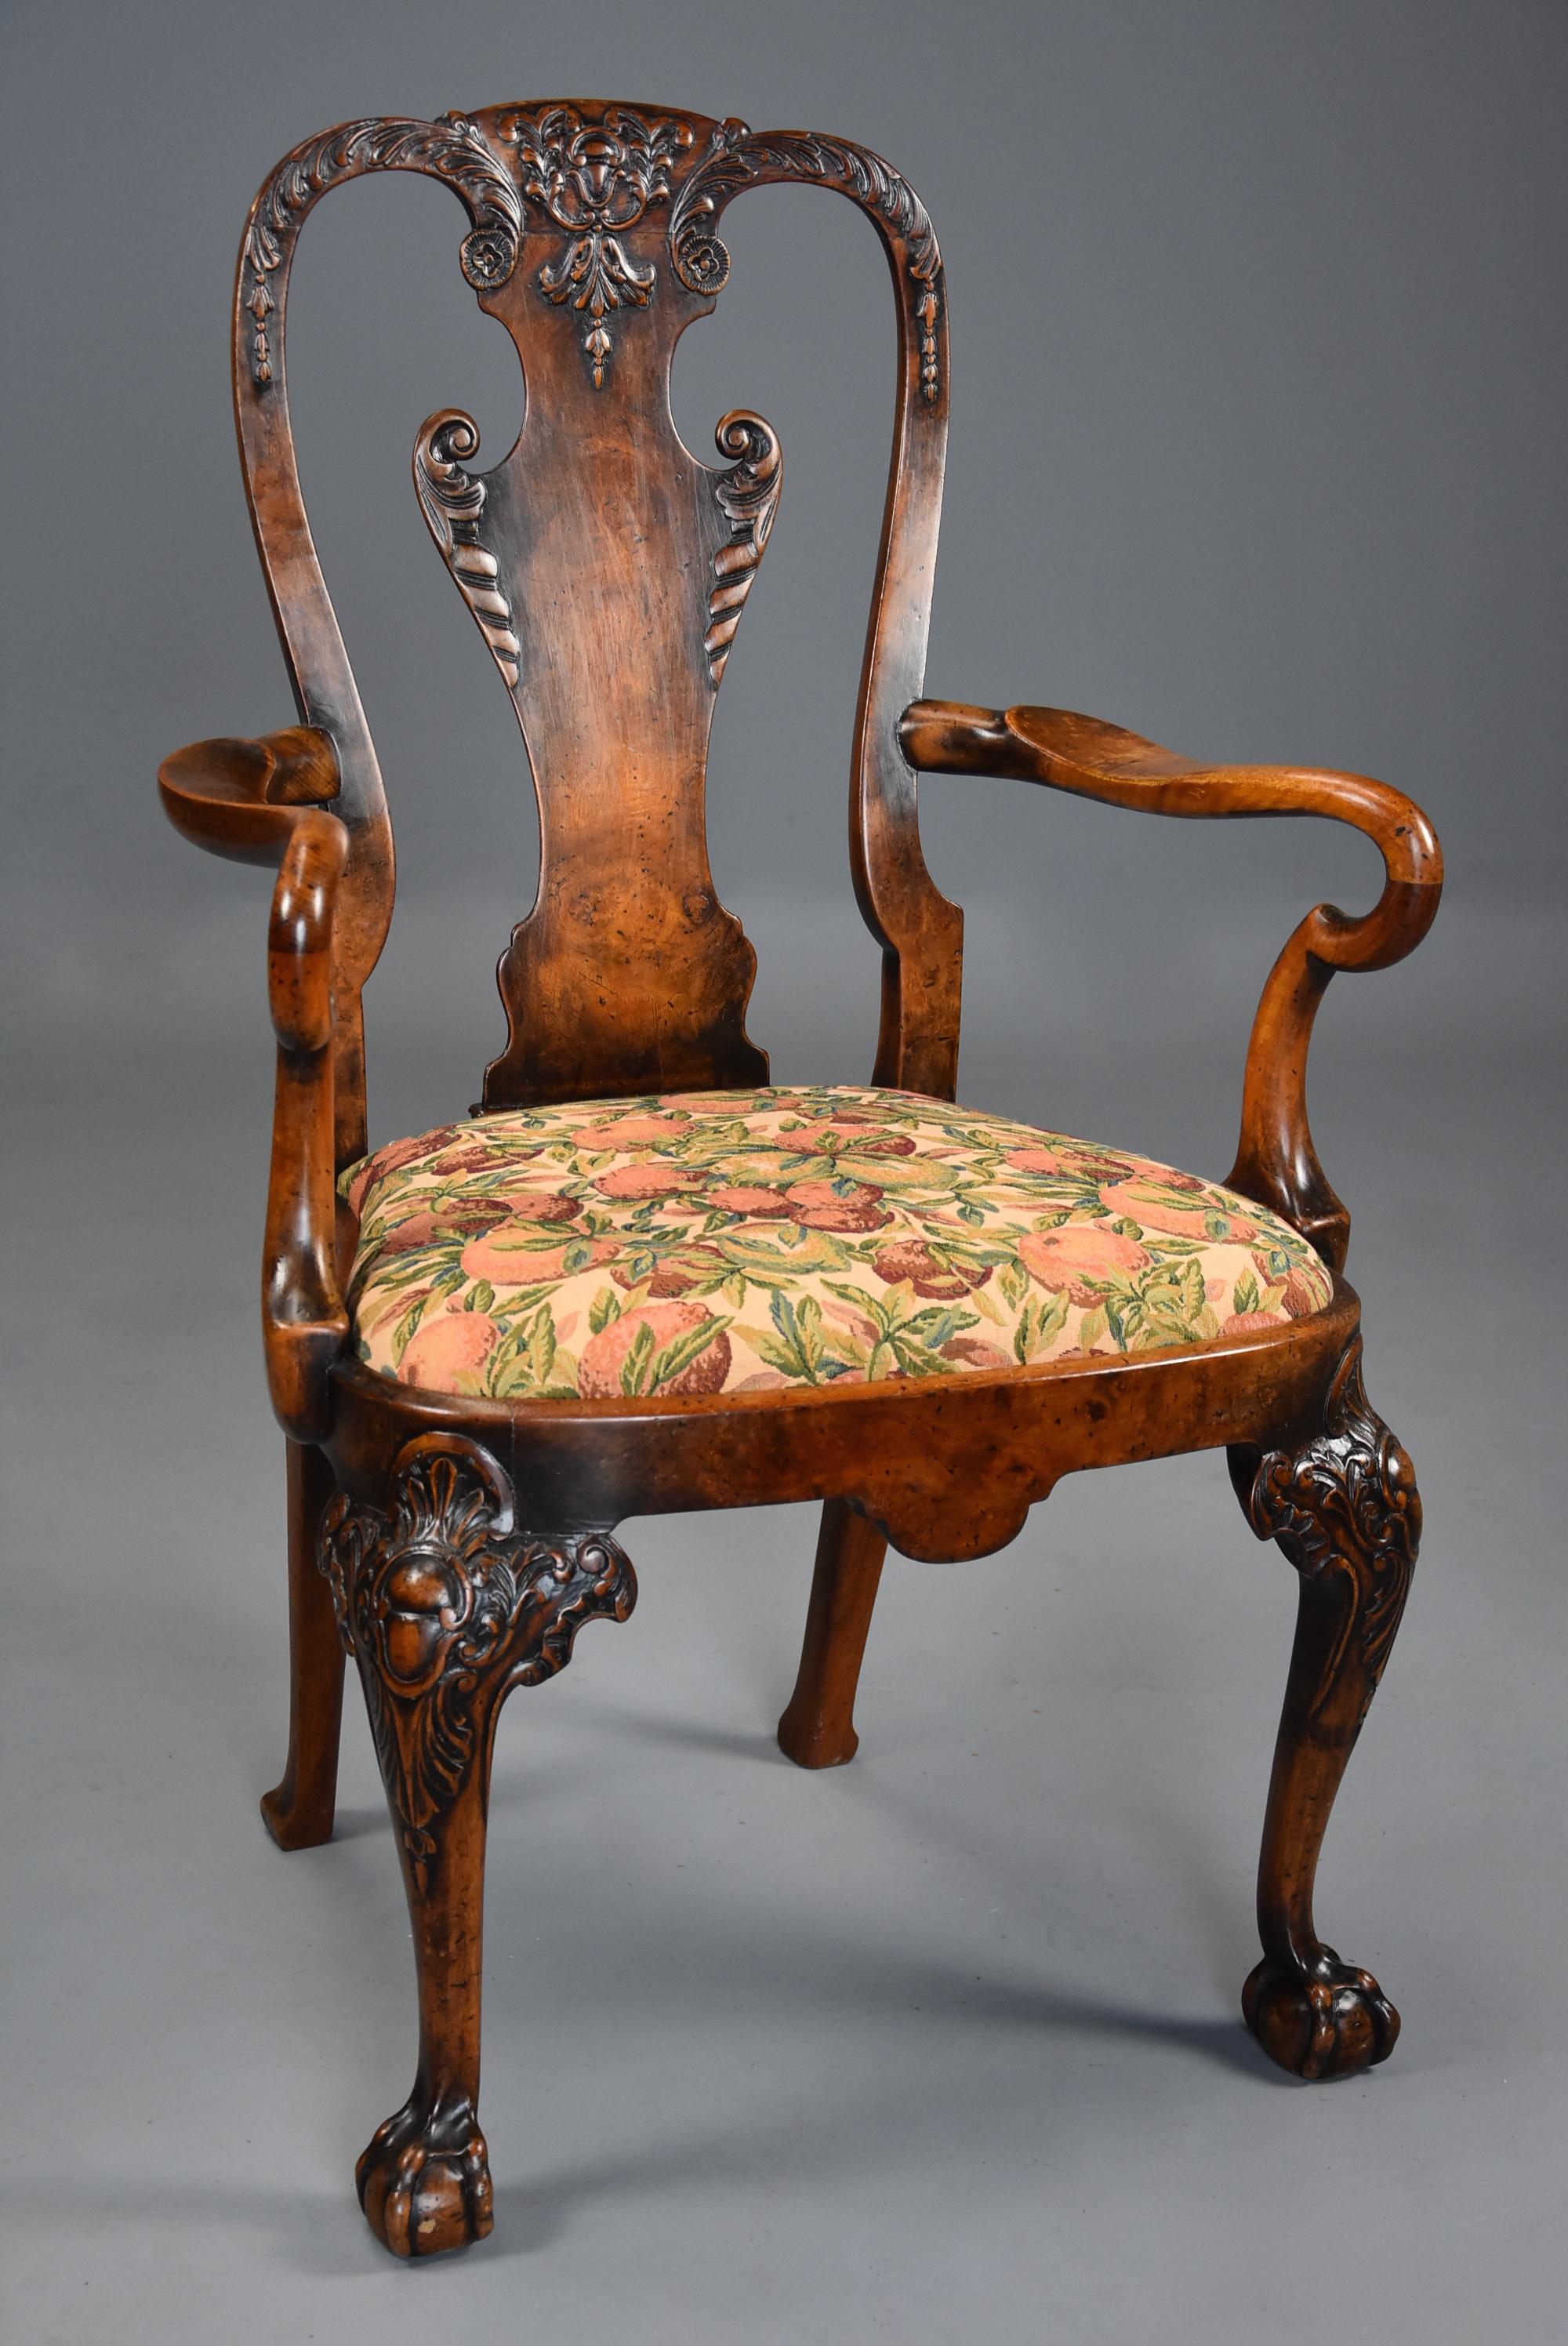 An early 20th century walnut open armchair in the Queen Ann style of fine patina.

This finely executed armchair consists of a shaped back with floral, foliate and scroll carved decoration with central burr walnut veneered back splat with carved